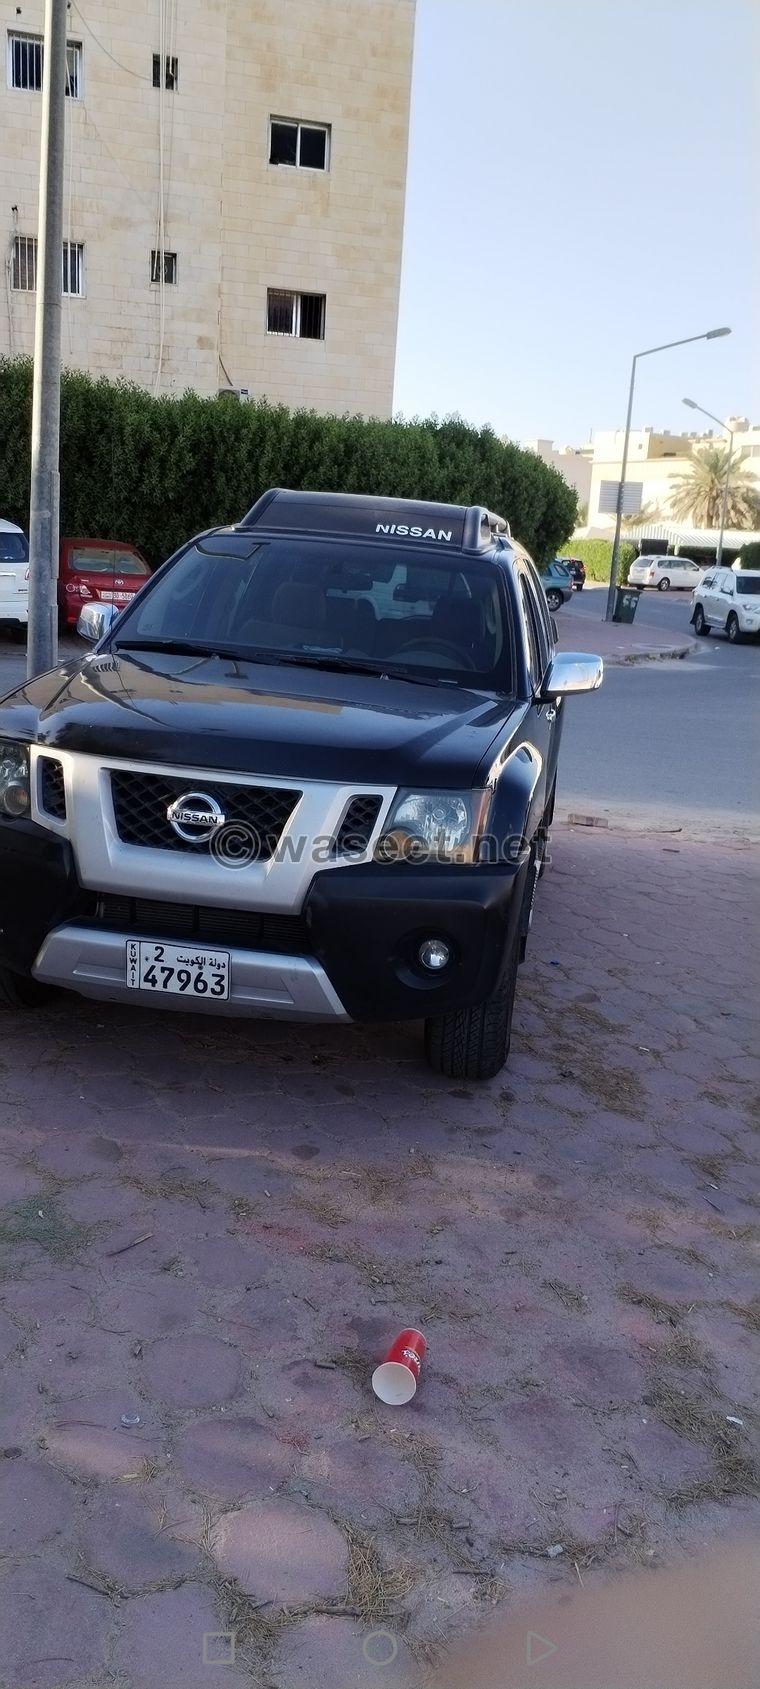 For sale or exchange Nissan Xterra 2009 0